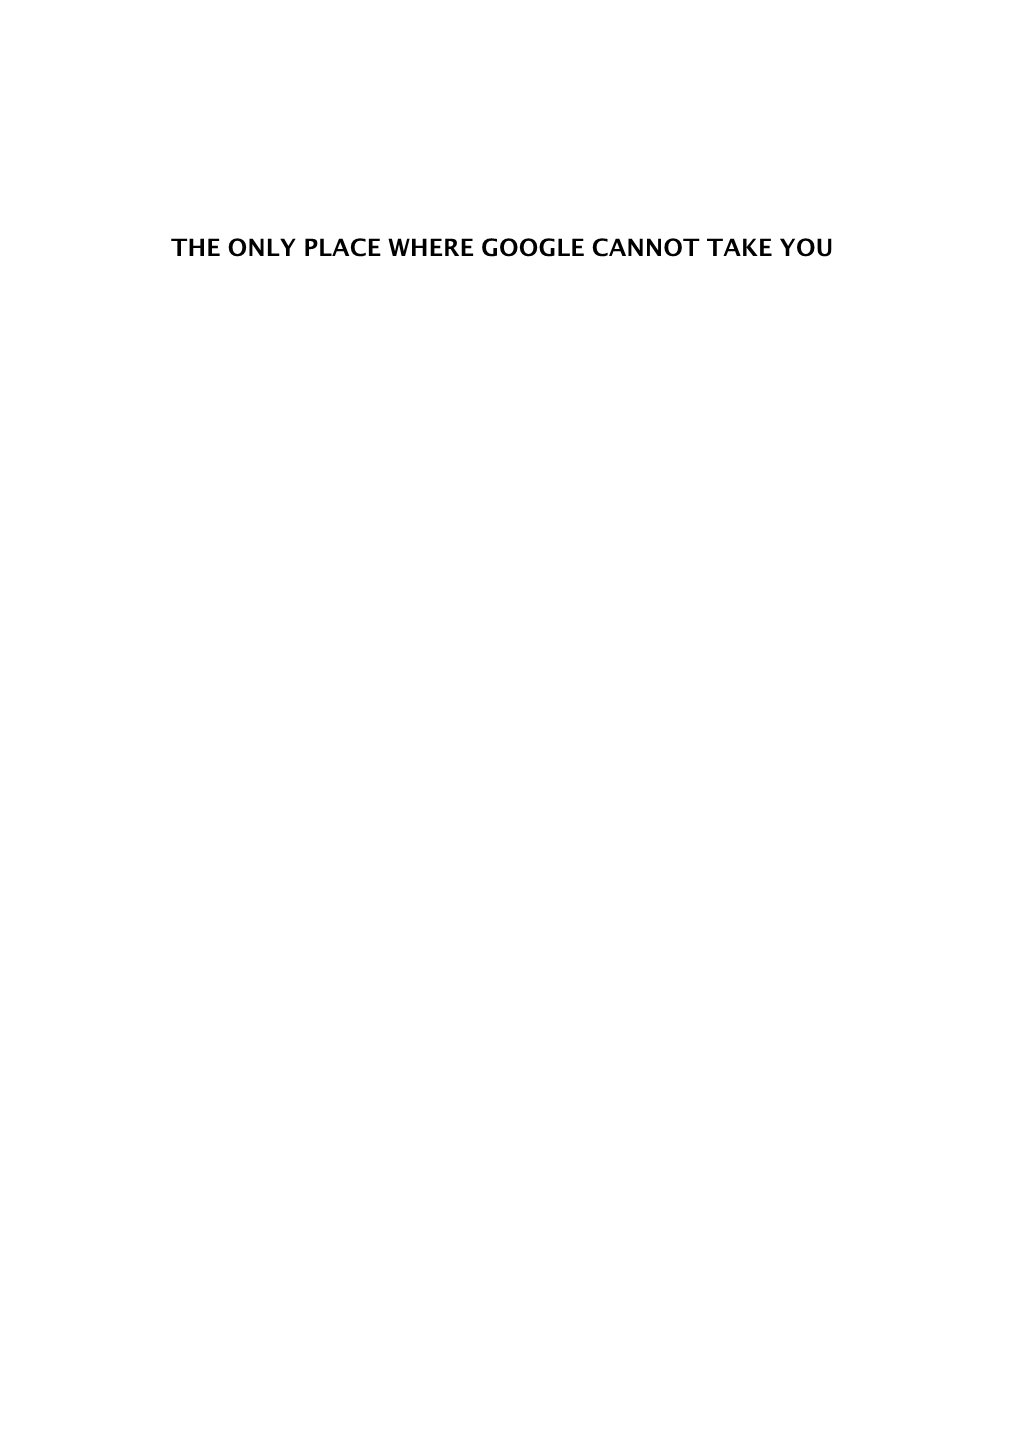 THE ONLY PLACE WHERE GOOGLE CANNOT TAKE YOU Contents